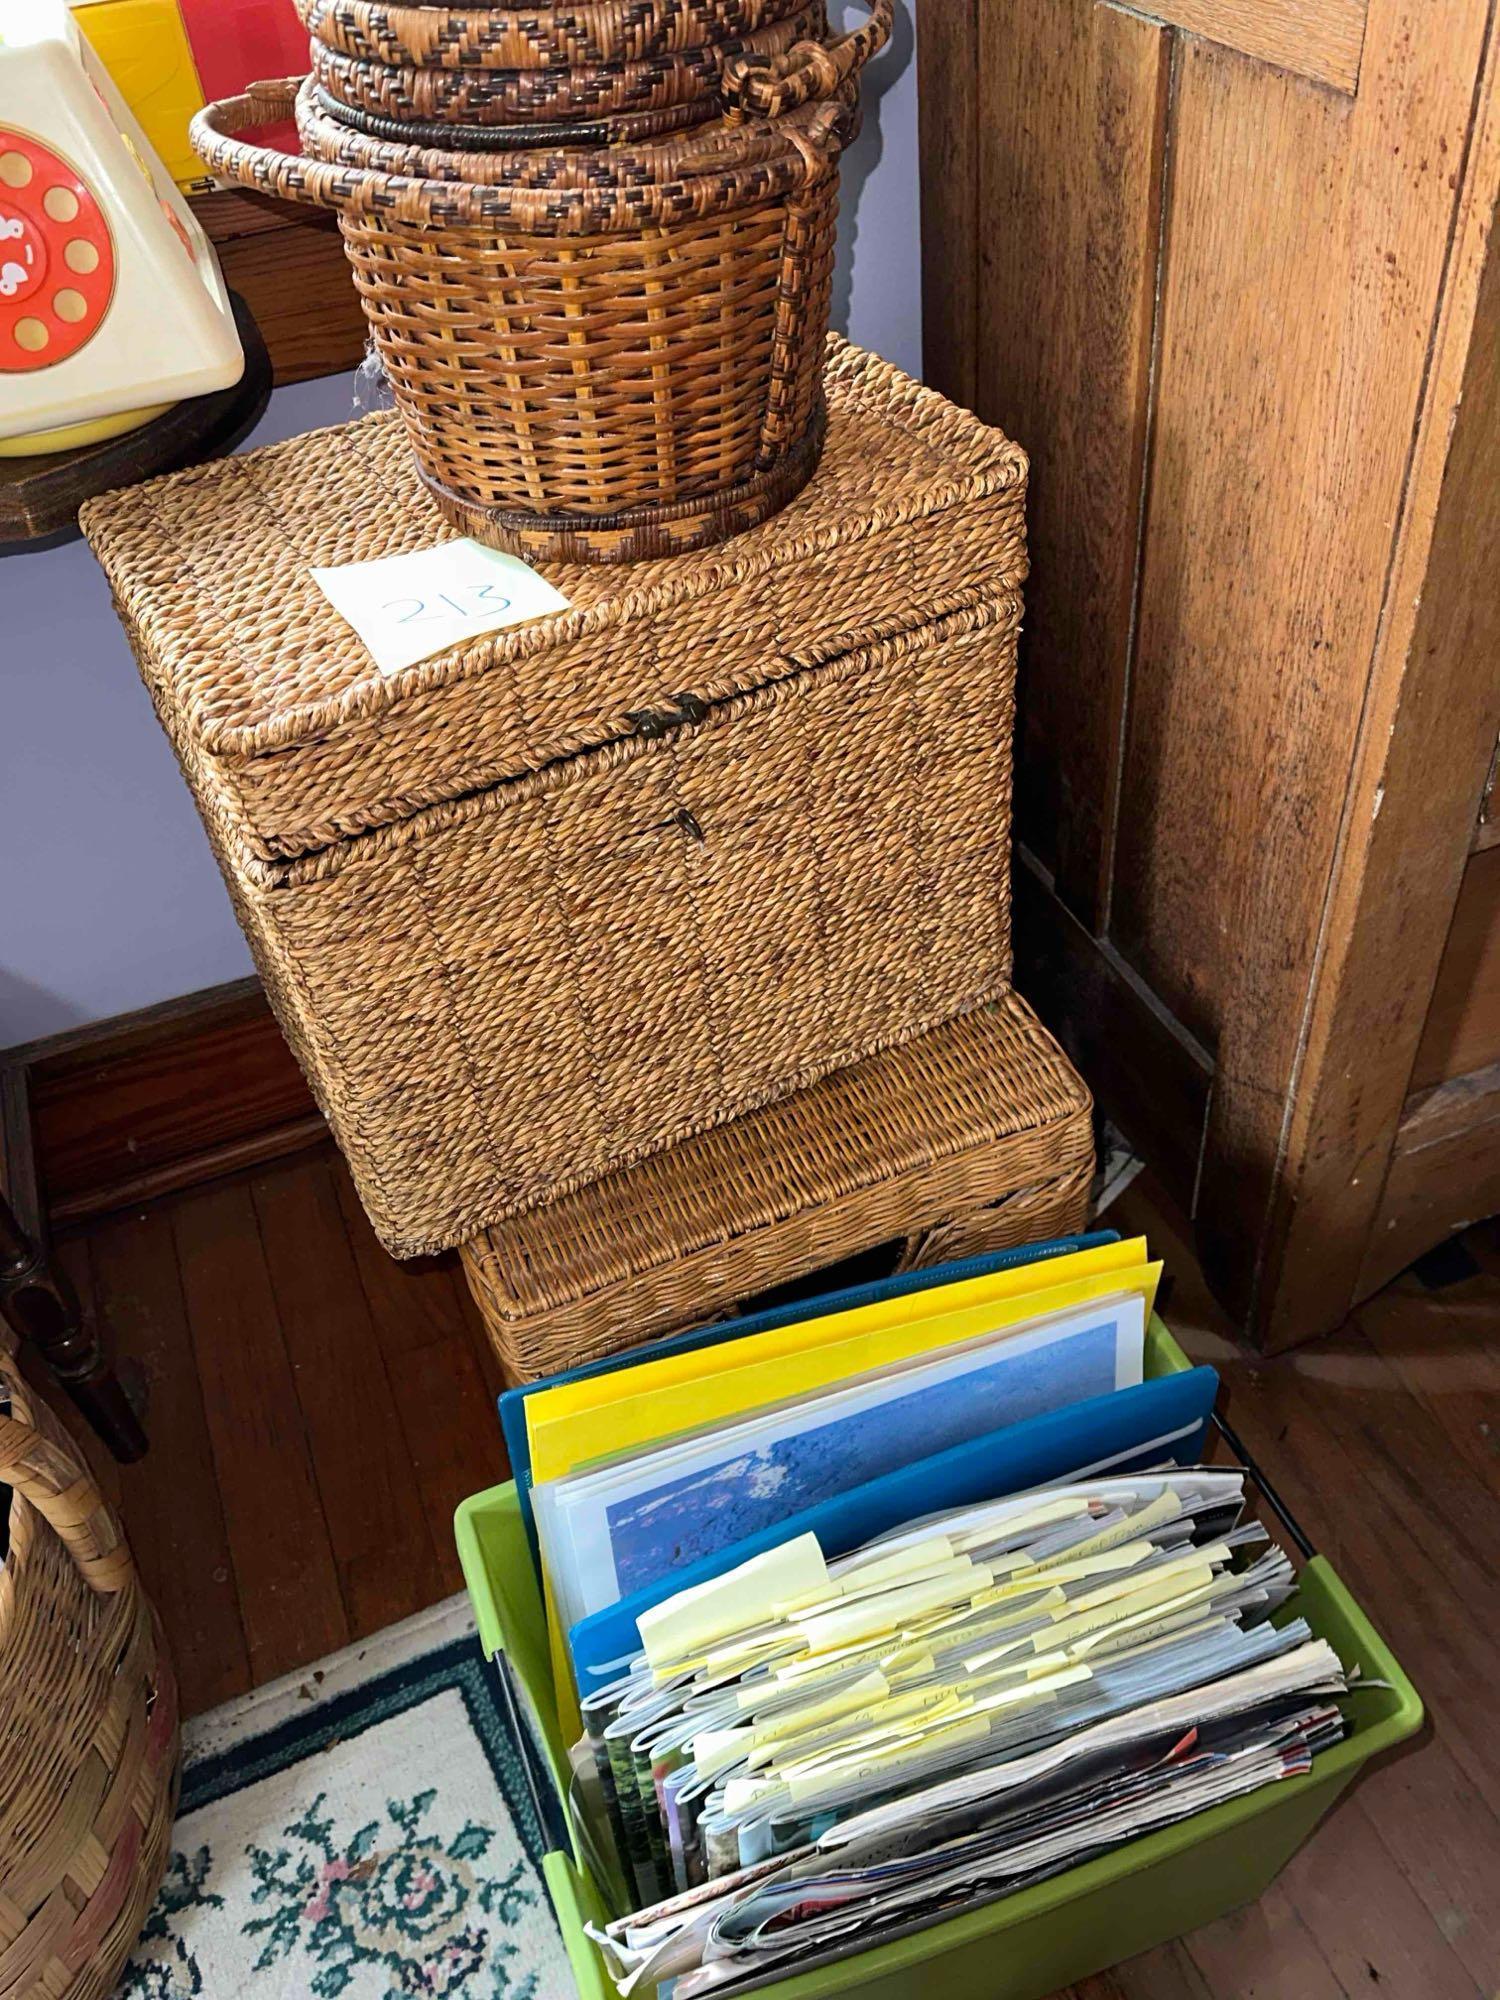 classic baskets full of cds, magazines